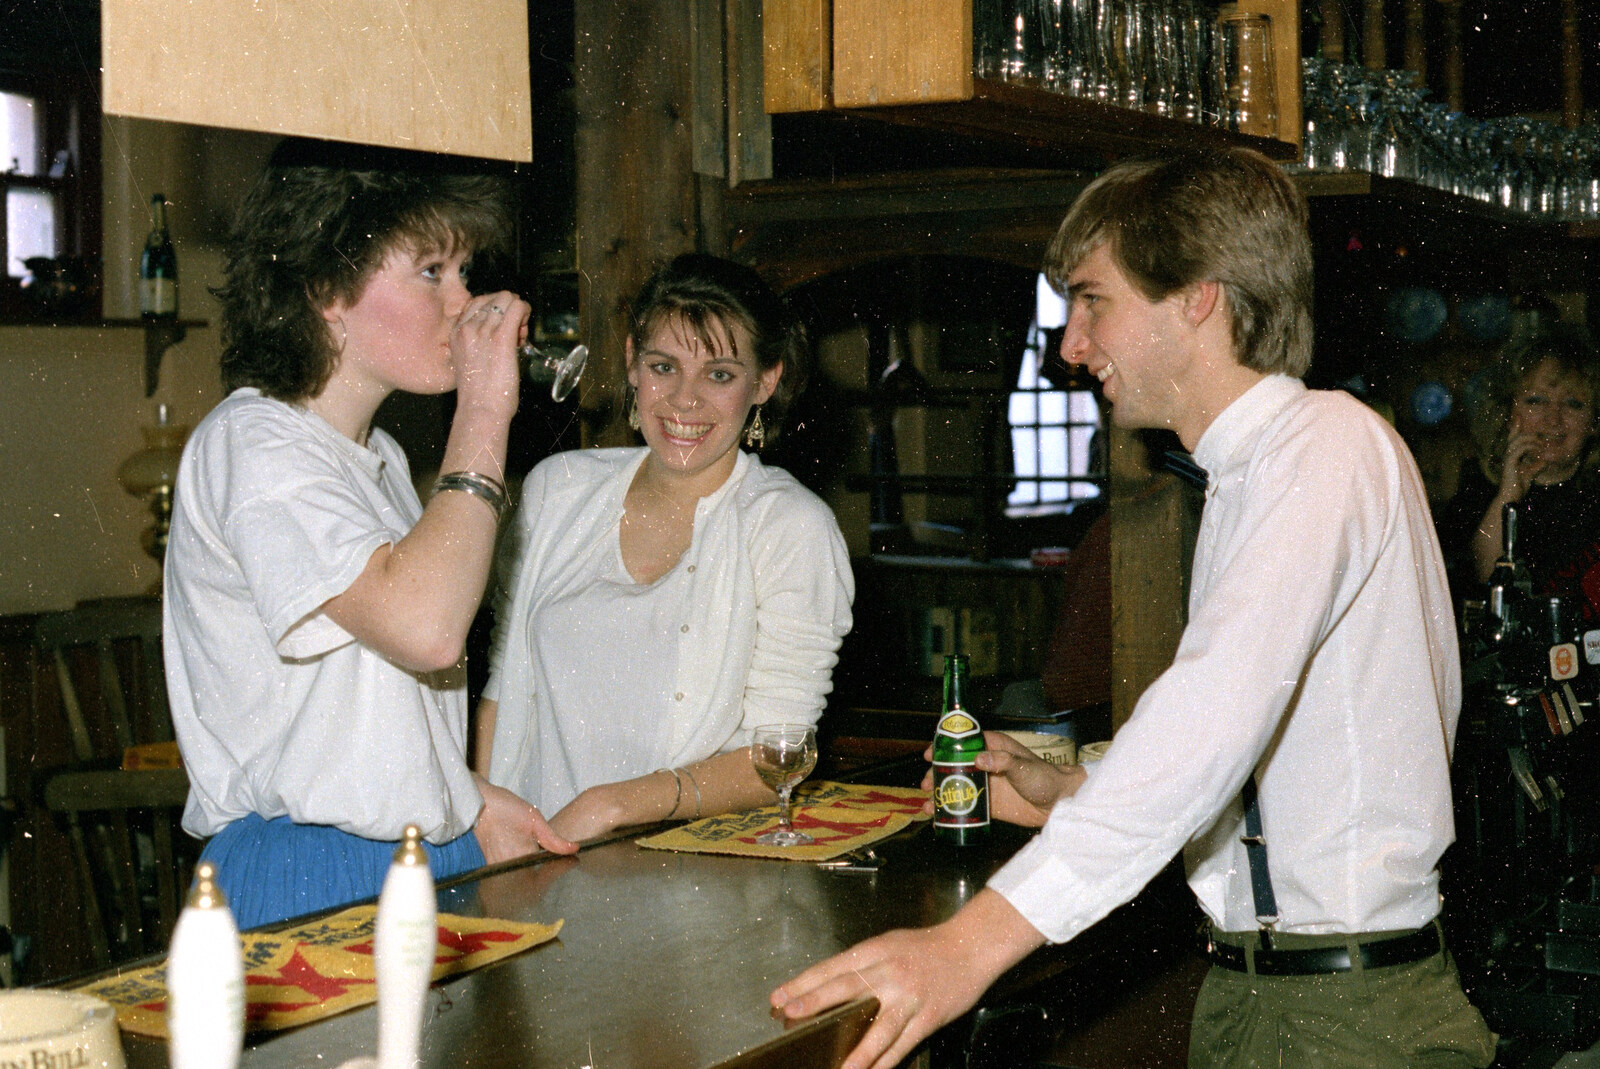 Ruth pretends to have a sip from Uni: The Plymouth Polytechnic Satique Project, Salcombe and Plymouth - 10th May 1986